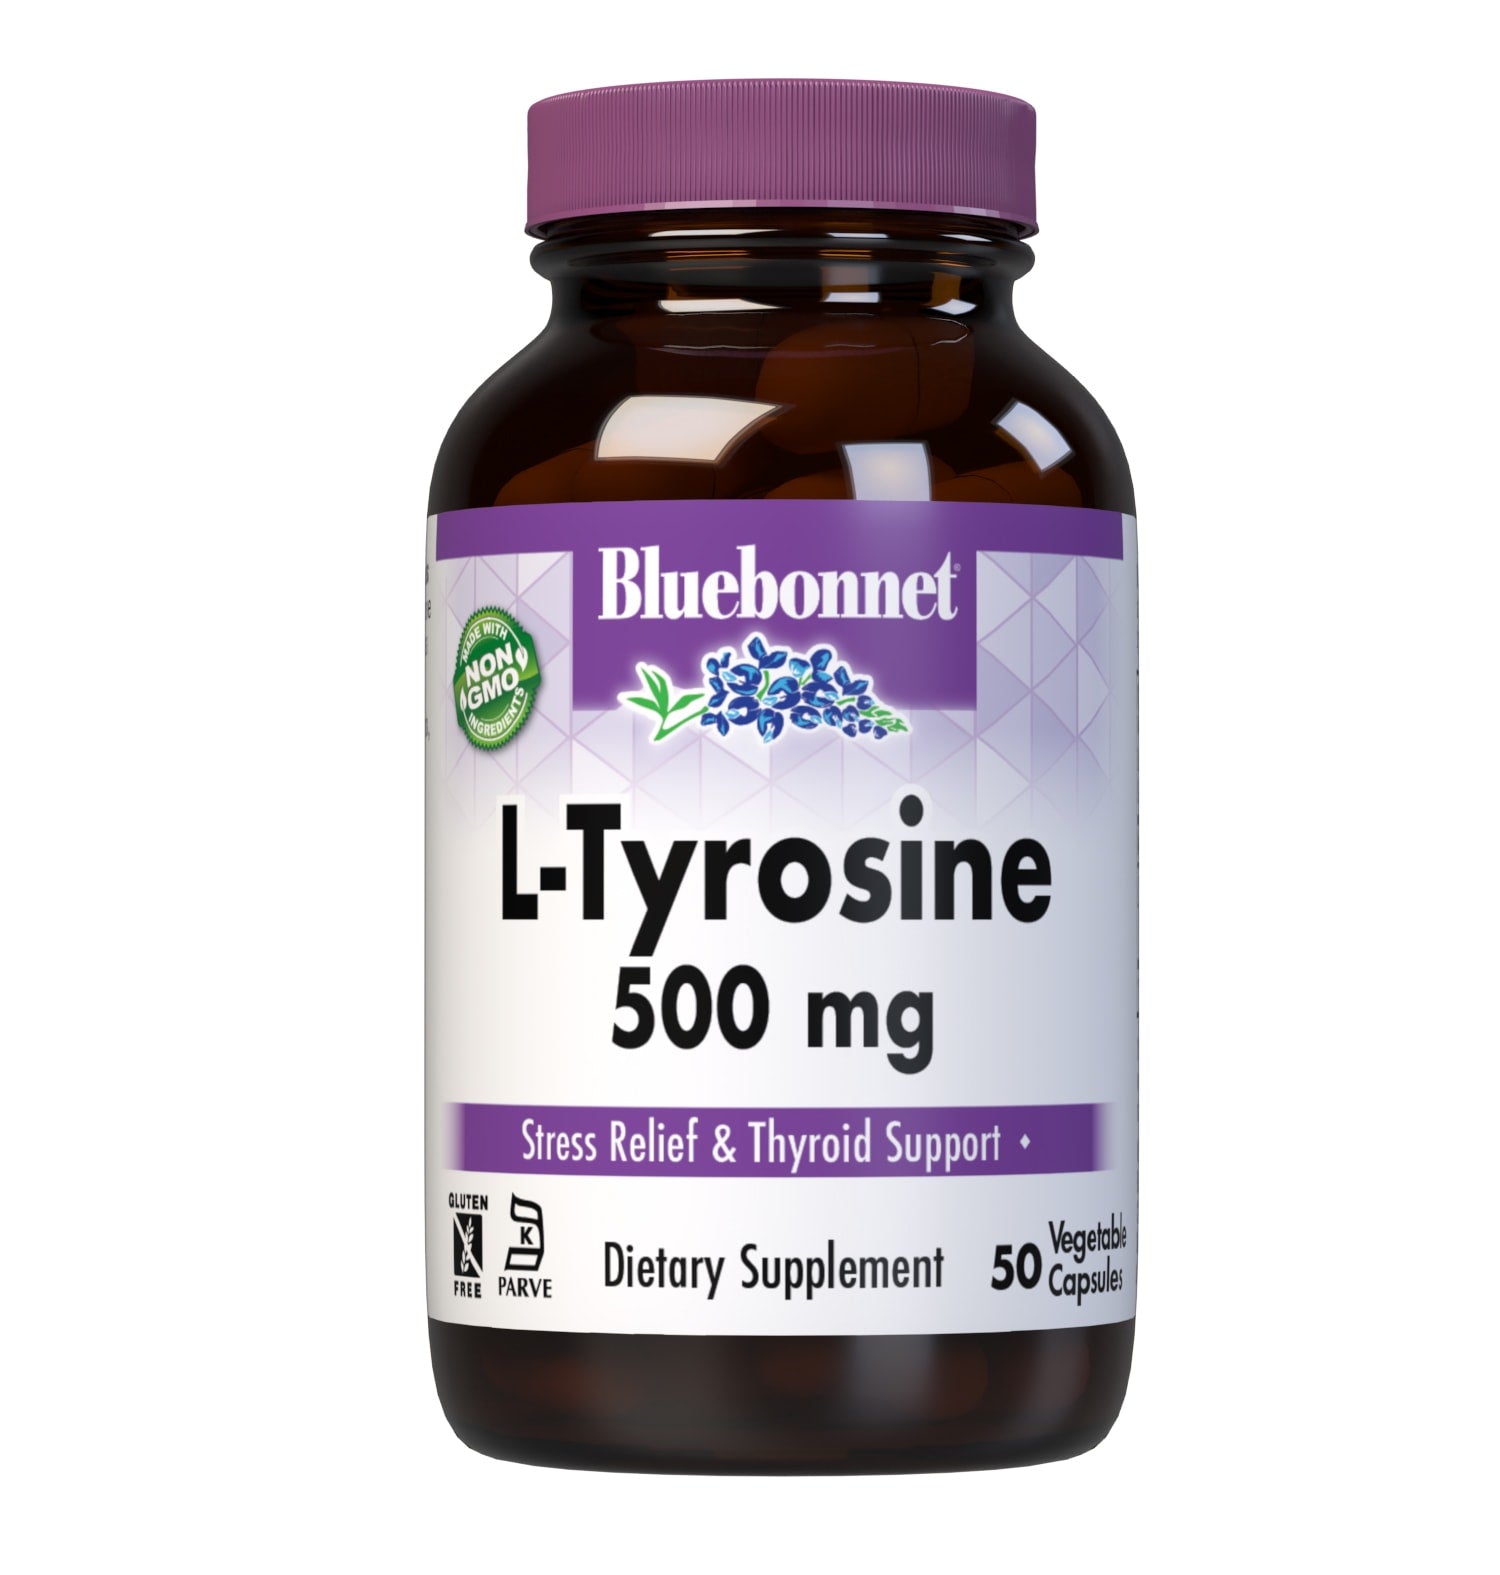 Bluebonnet L-Tyrosine 500 mg 50 Vegetable Capsules provide a free-form amino acid L-tyrosine in its crystalline form. #size_50 count